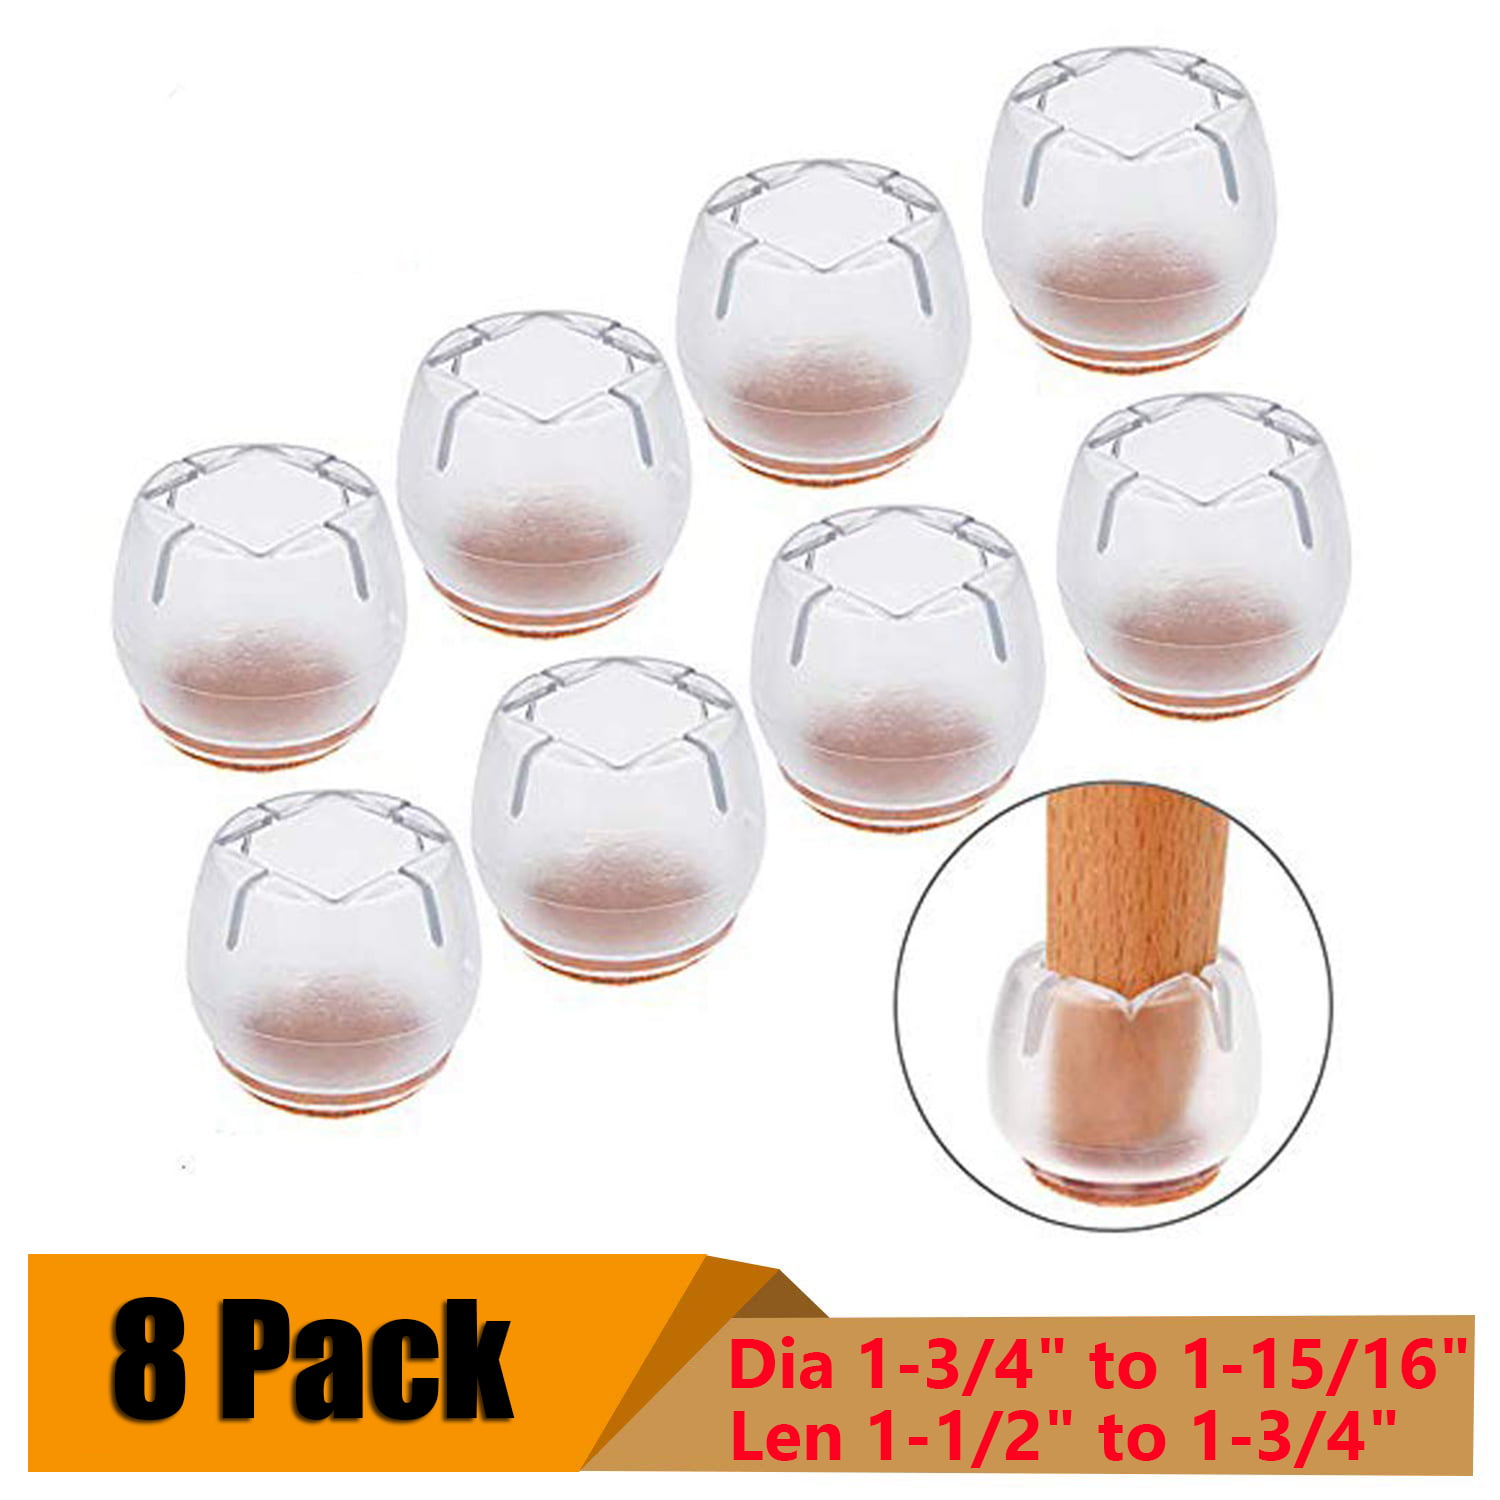 4/16PCS Silicon Furniture Leg Protection Cover Table ChairCap Floor Protector 